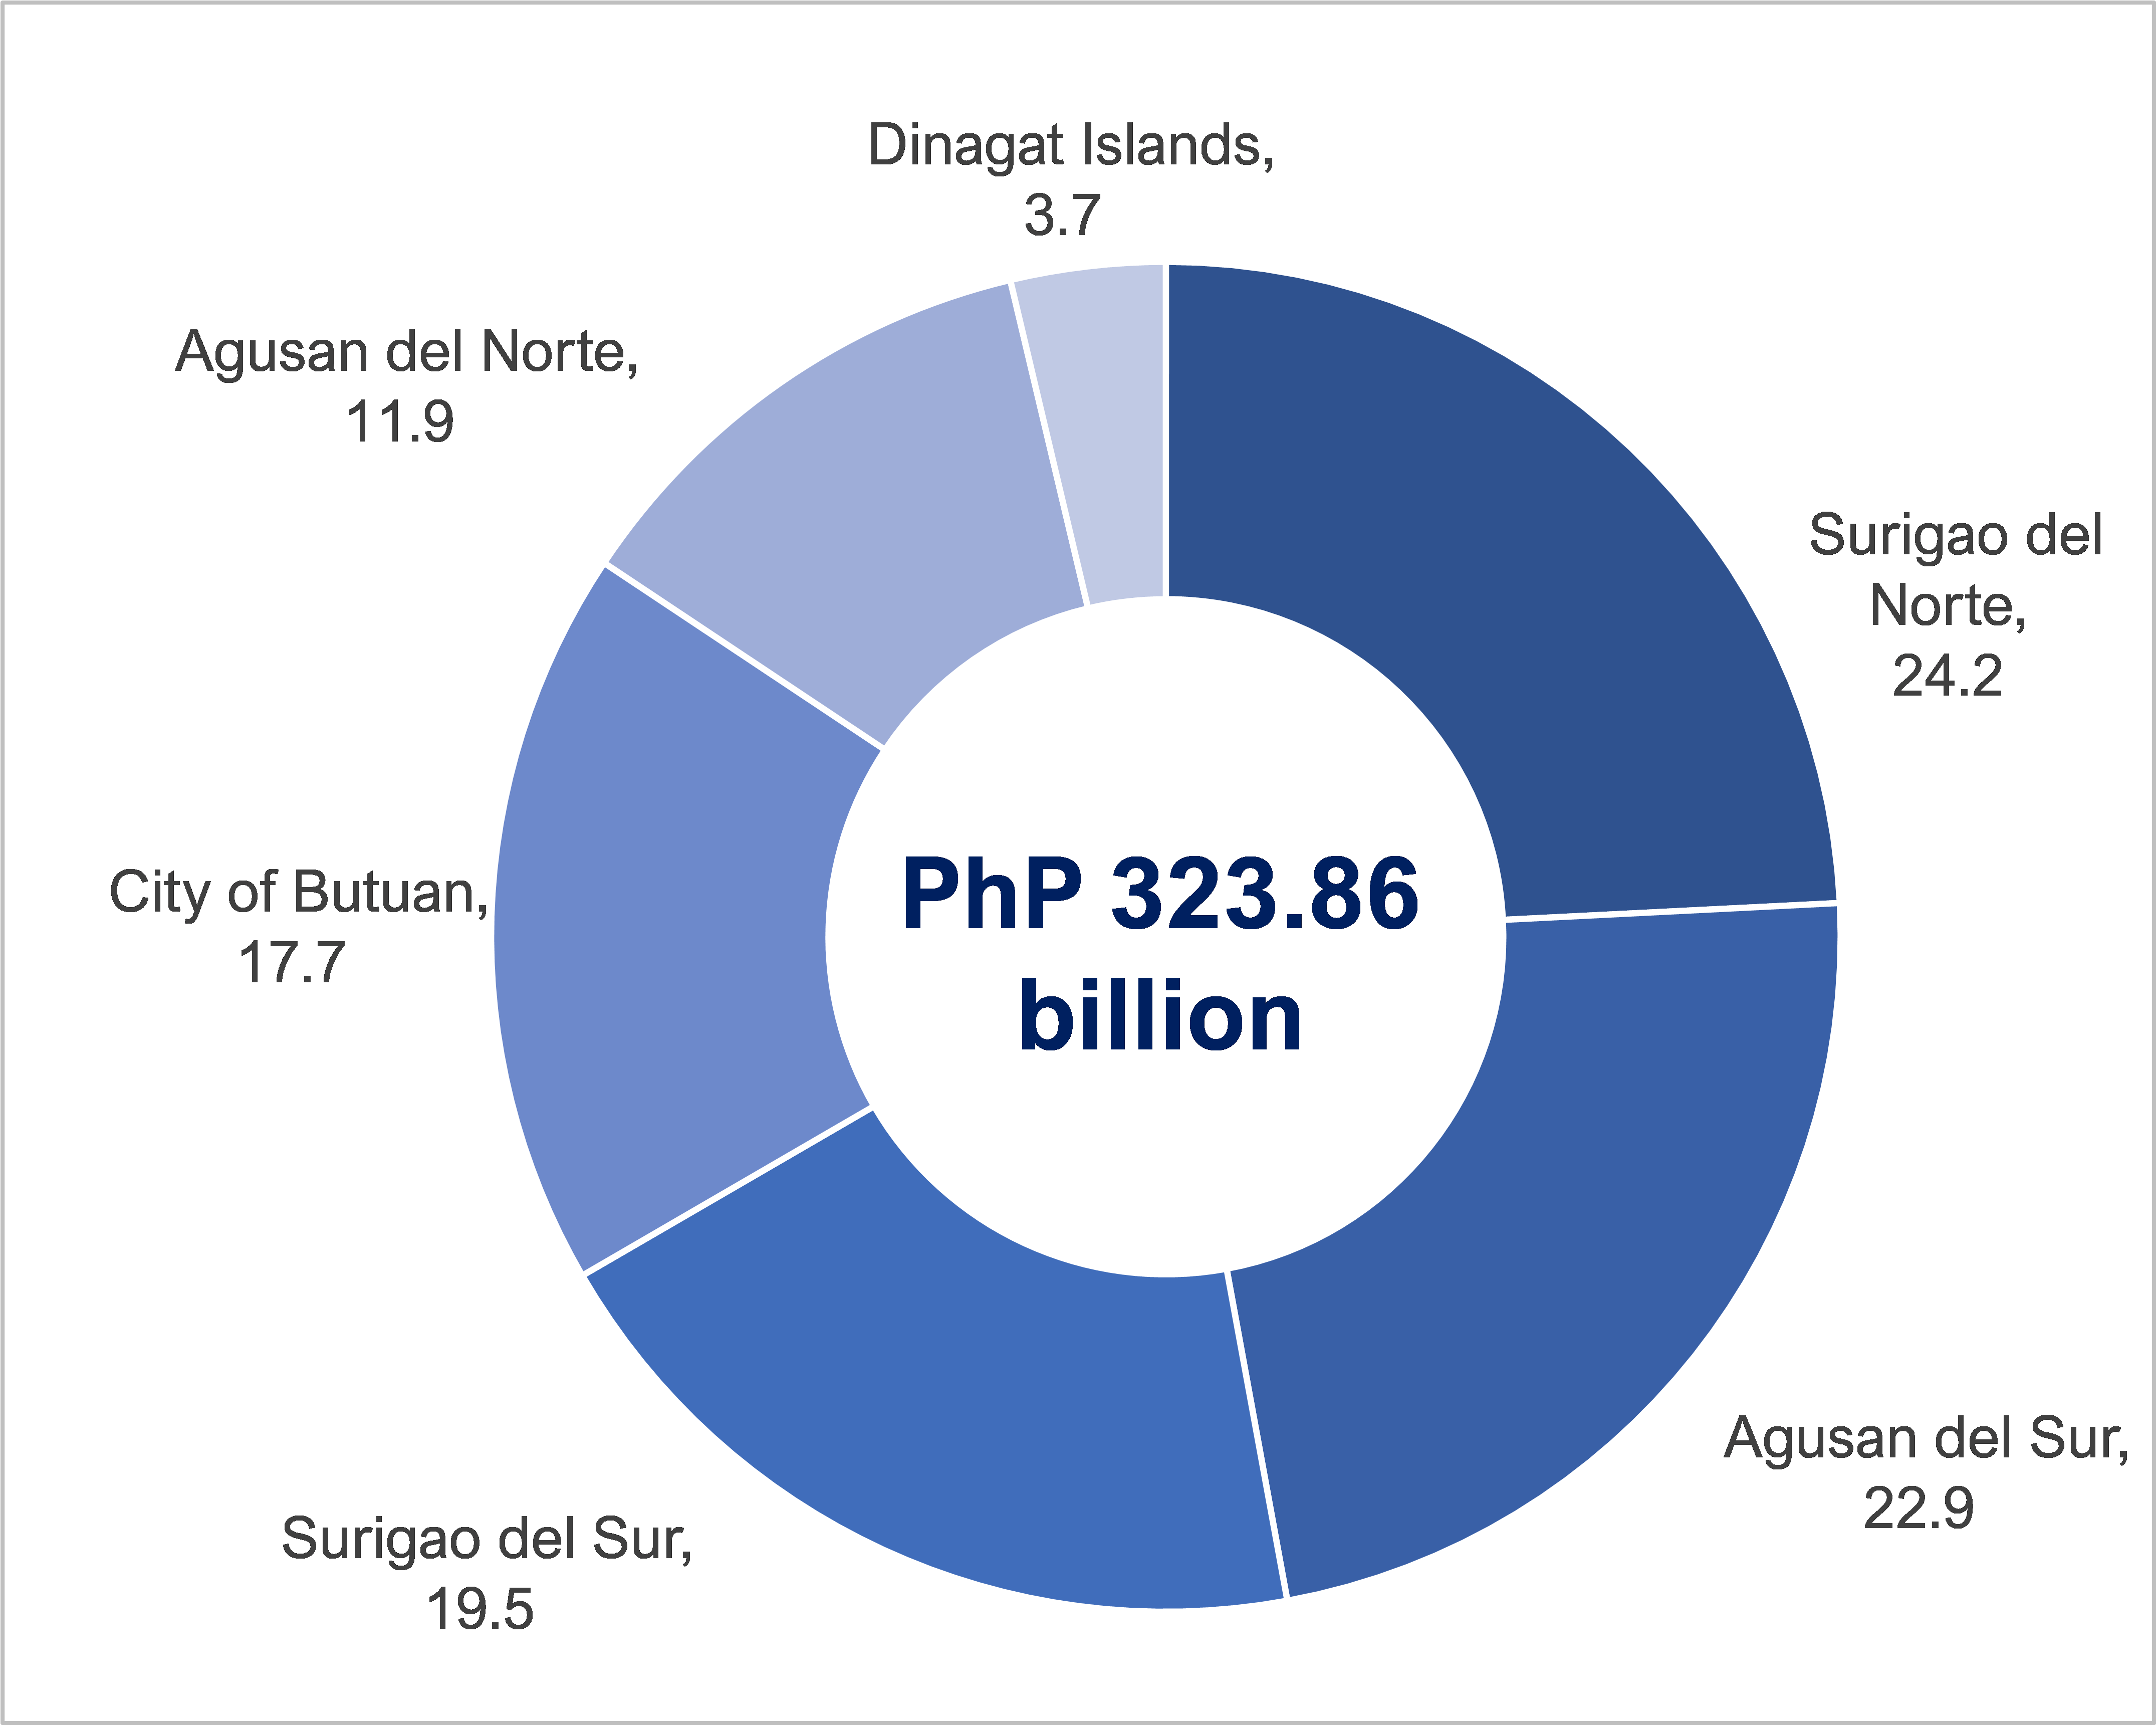 Share of Provinces and HUC to Caraga's GDP